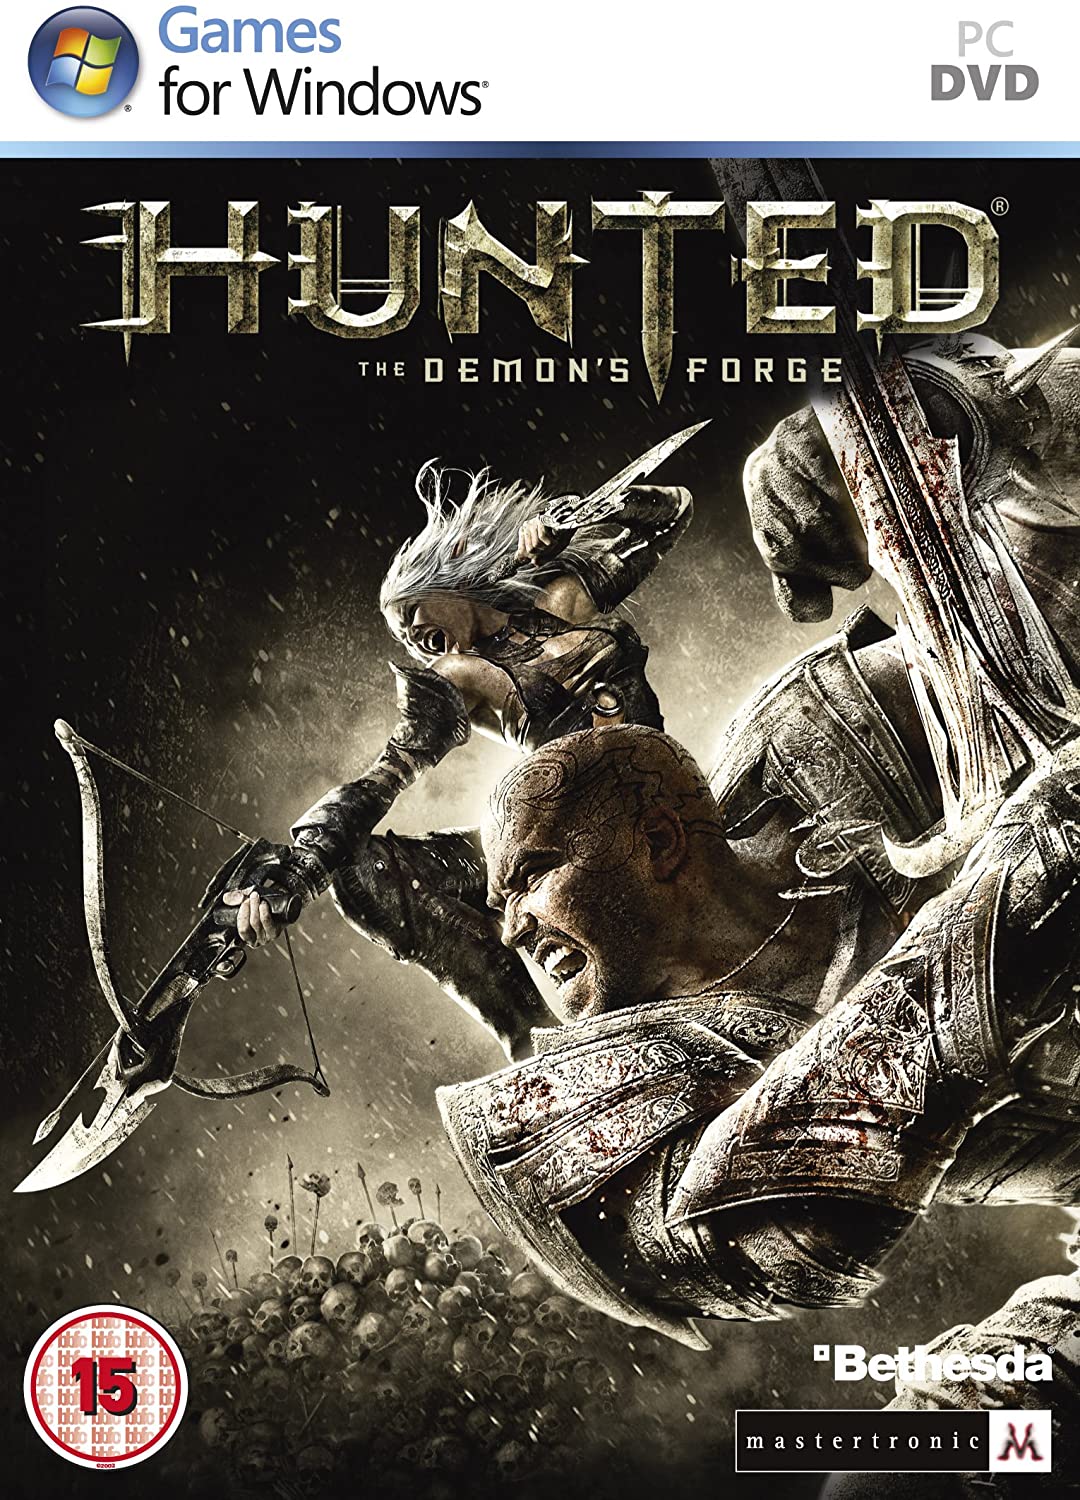 Hunted: The Demon's Forge (PC DVD)